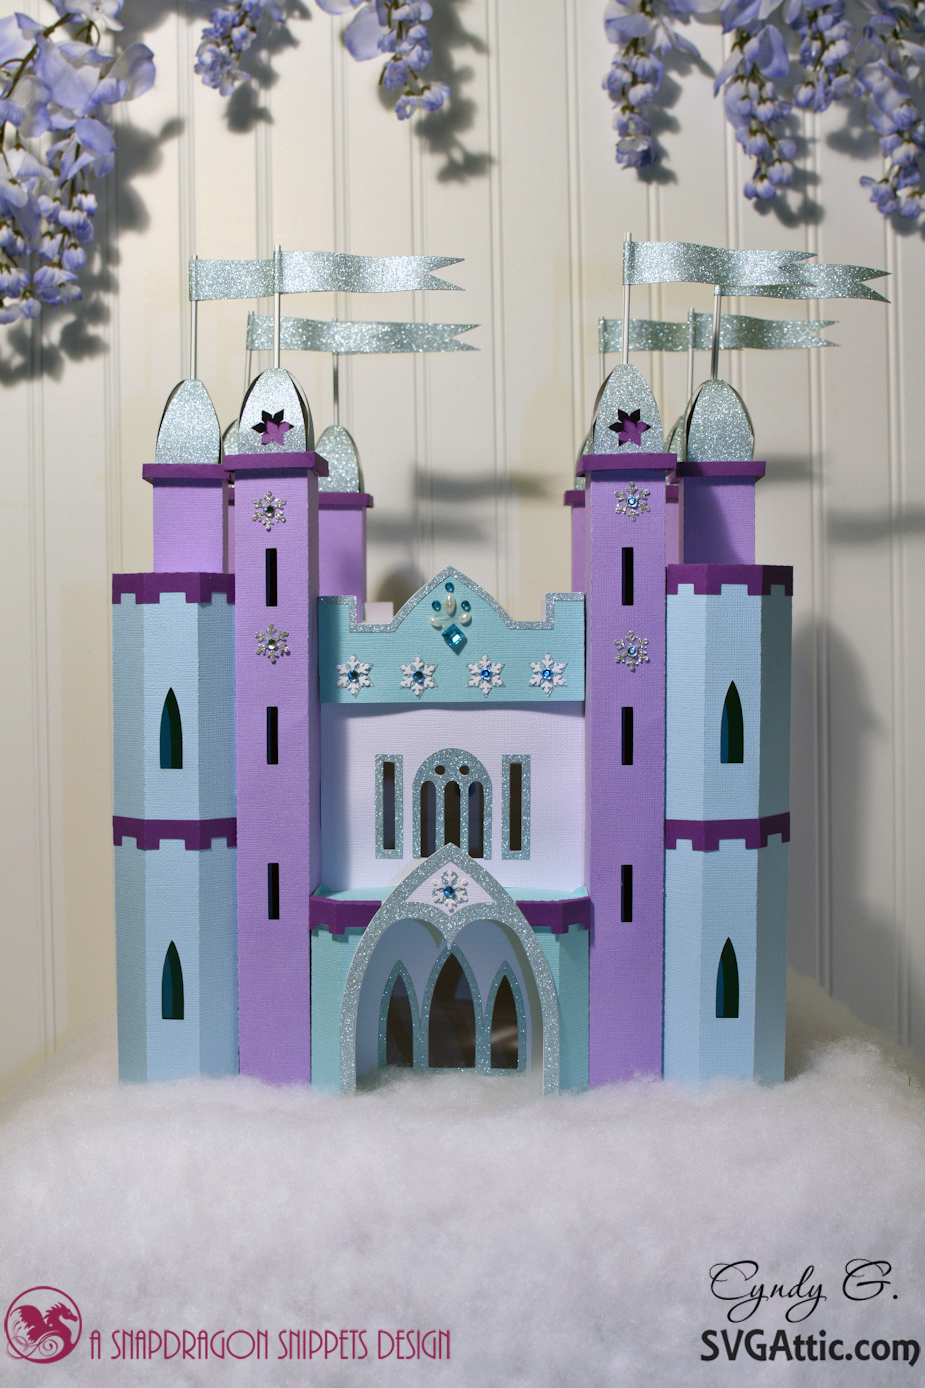 Download SVG Attic Blog: Ice Princess Castle ~ with Cyndy G